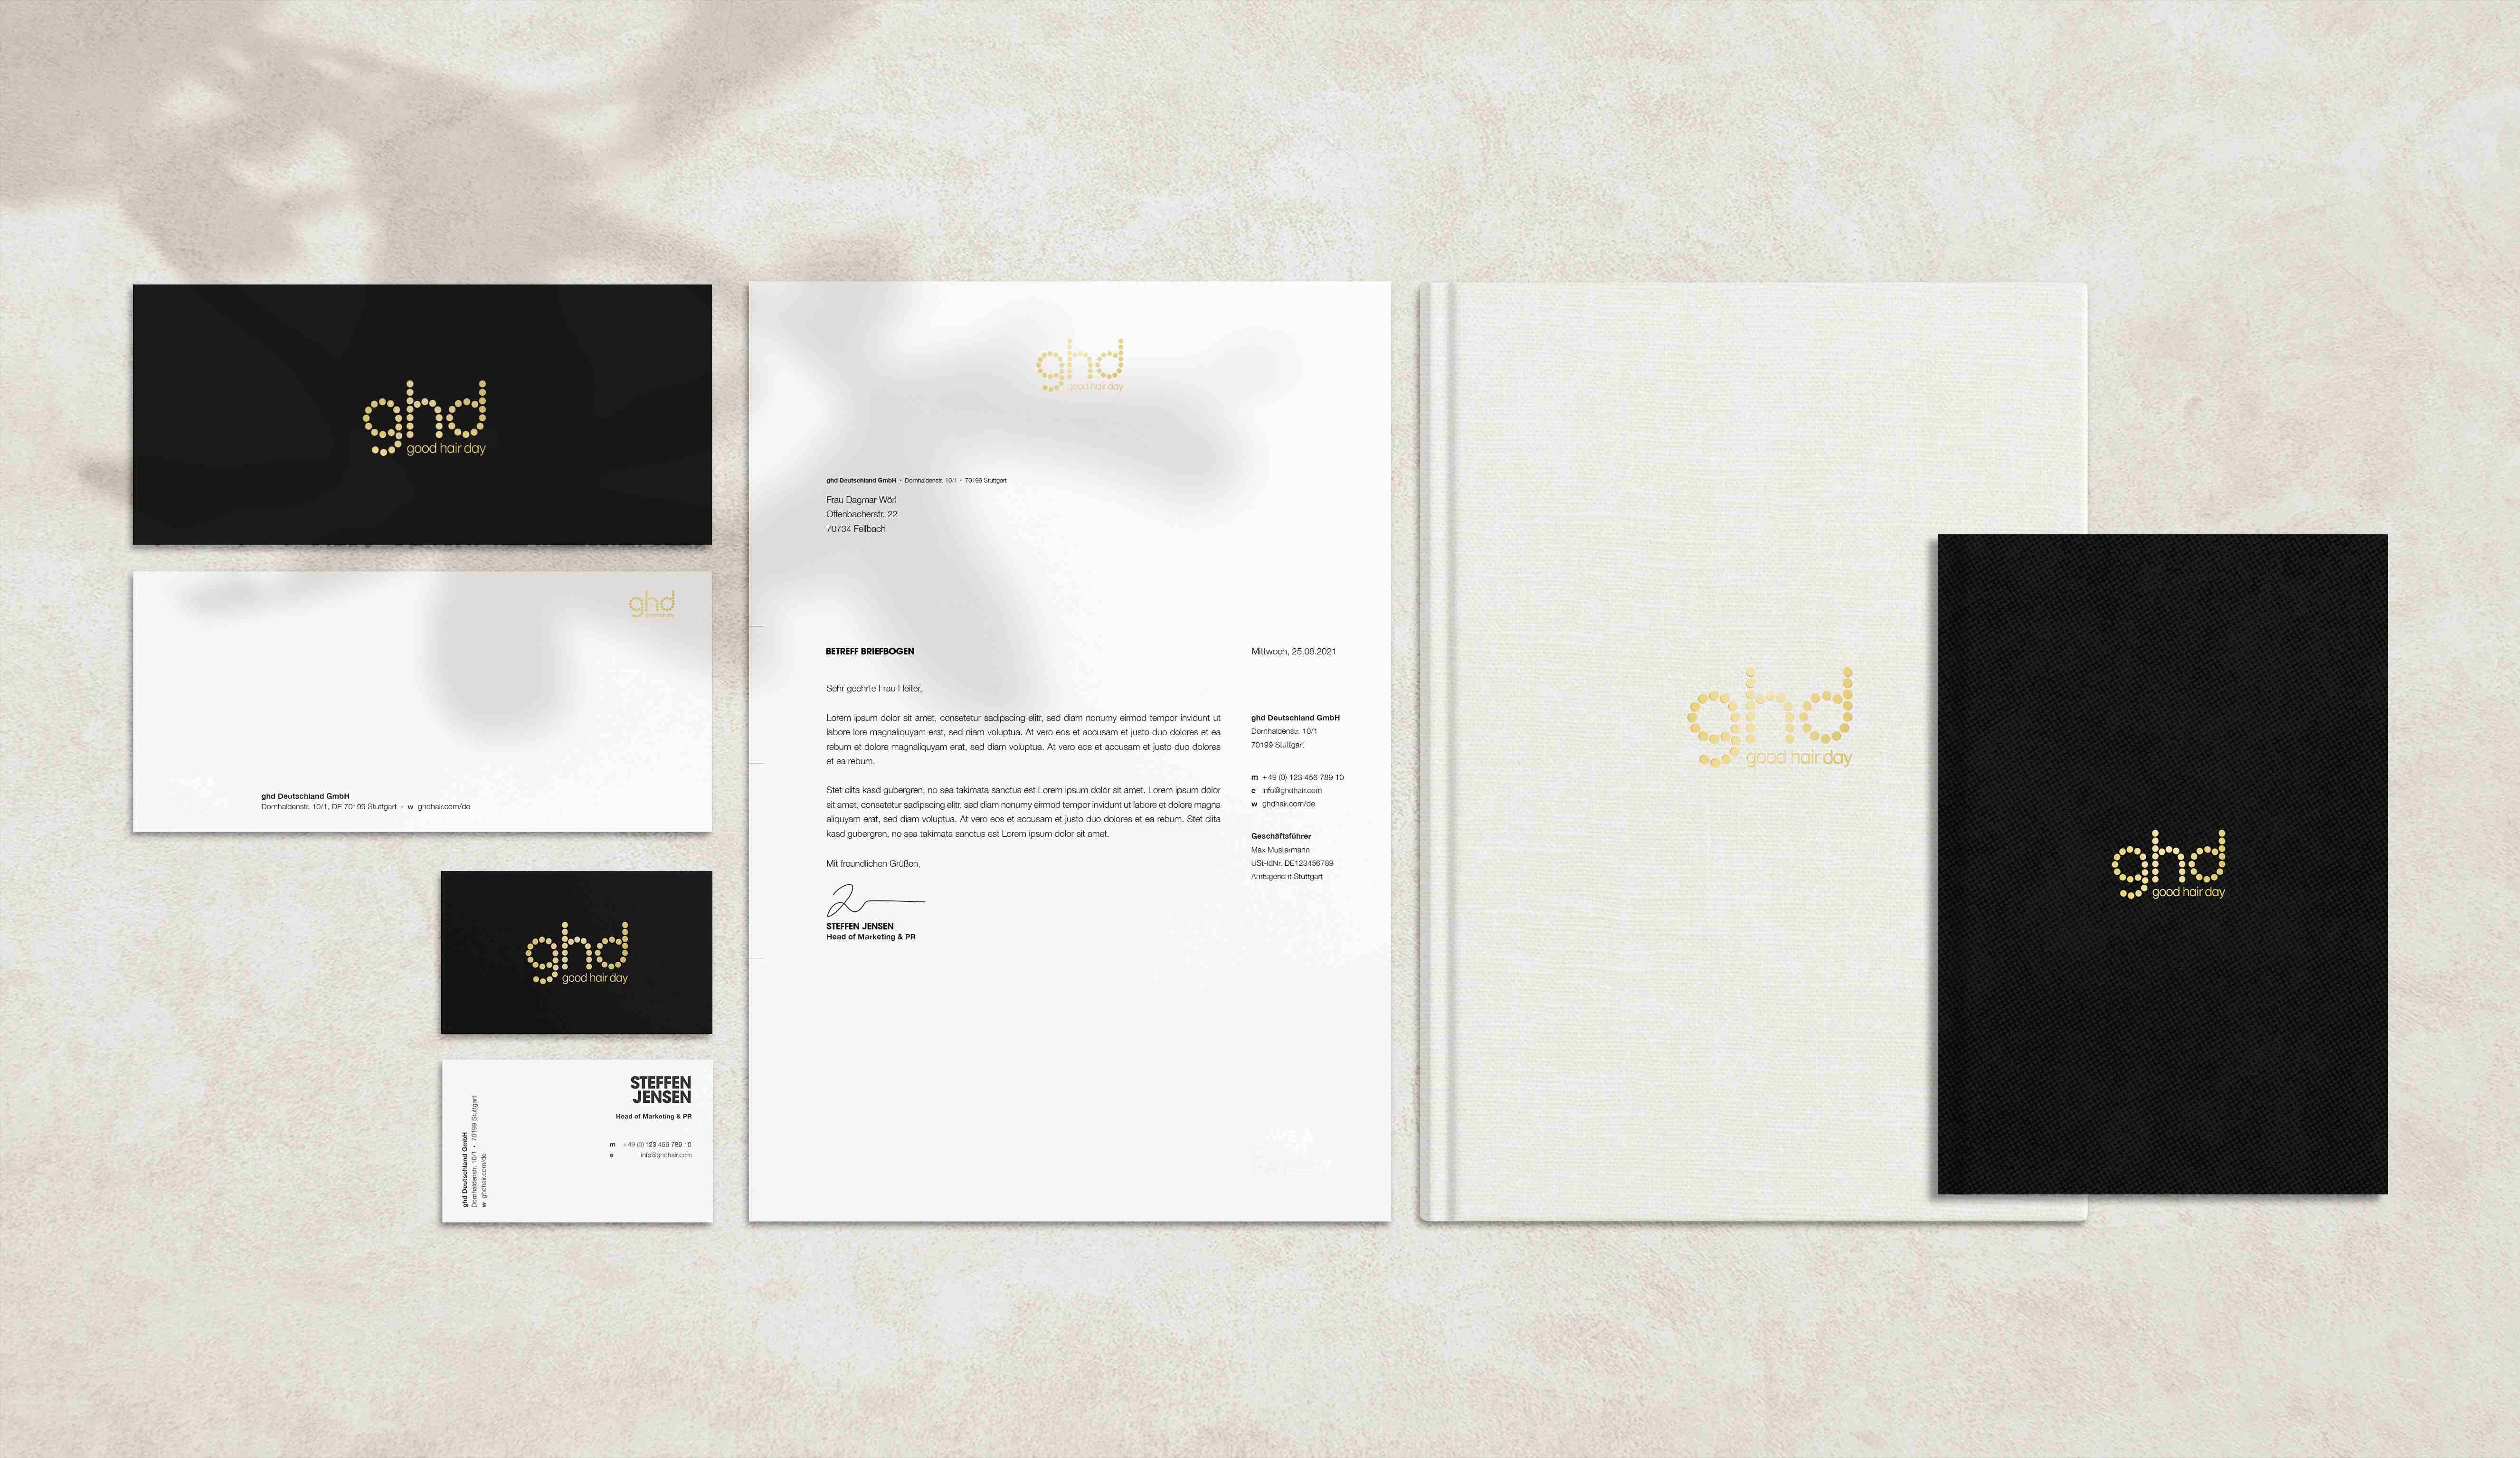 GHD brand logo and stationery set featuring elegant design elements | Contenance GmbH - GHD design